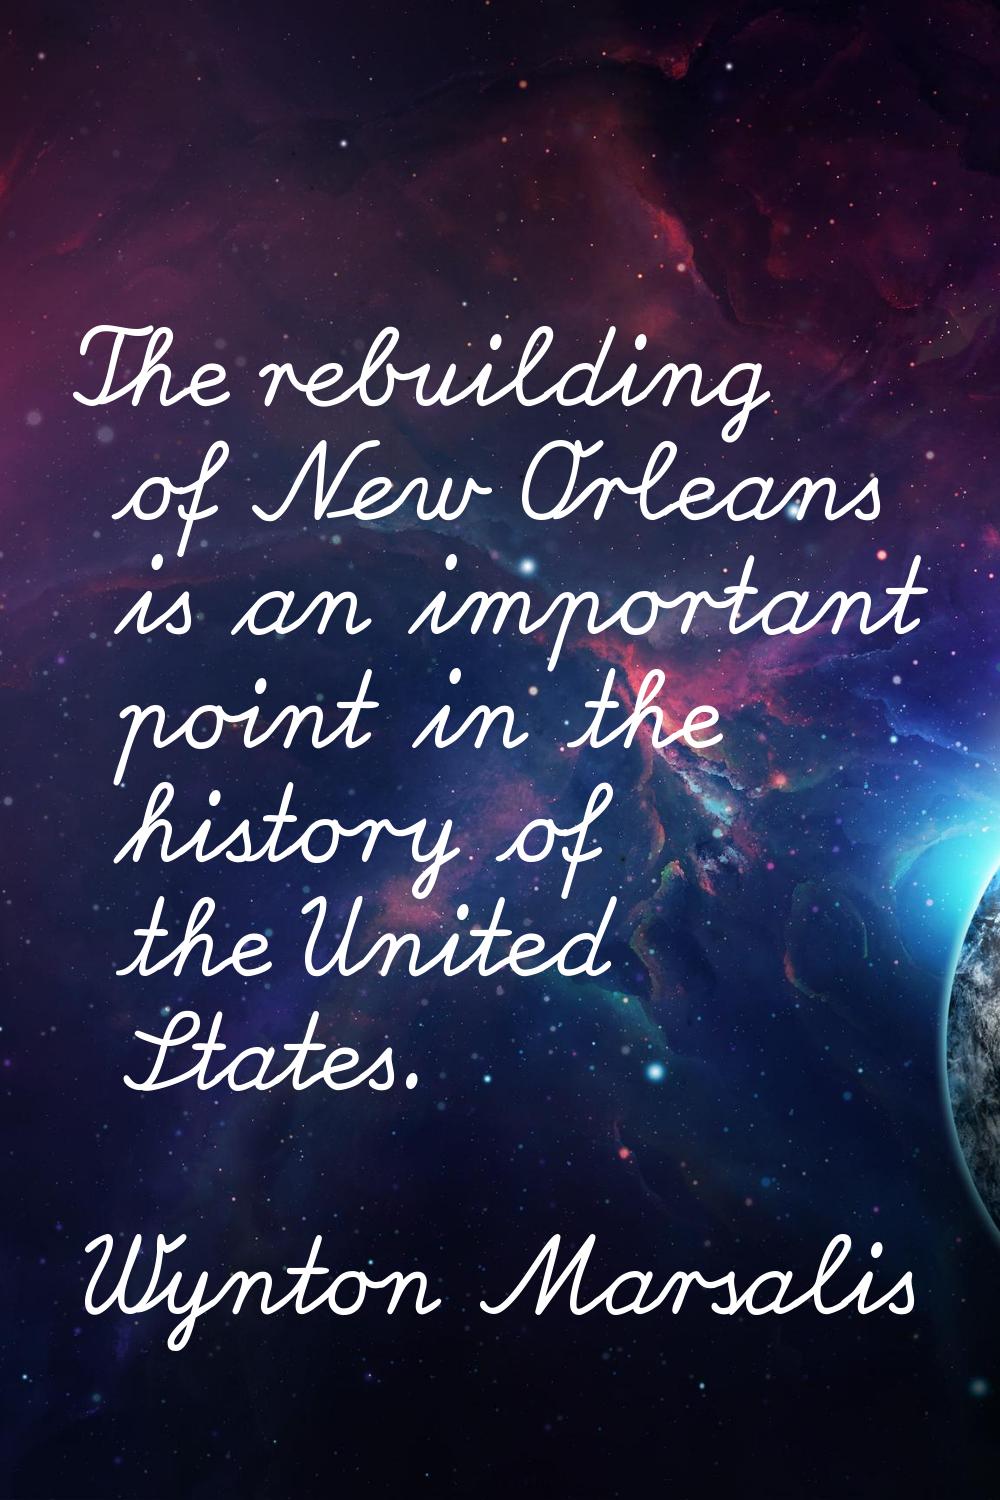 The rebuilding of New Orleans is an important point in the history of the United States.